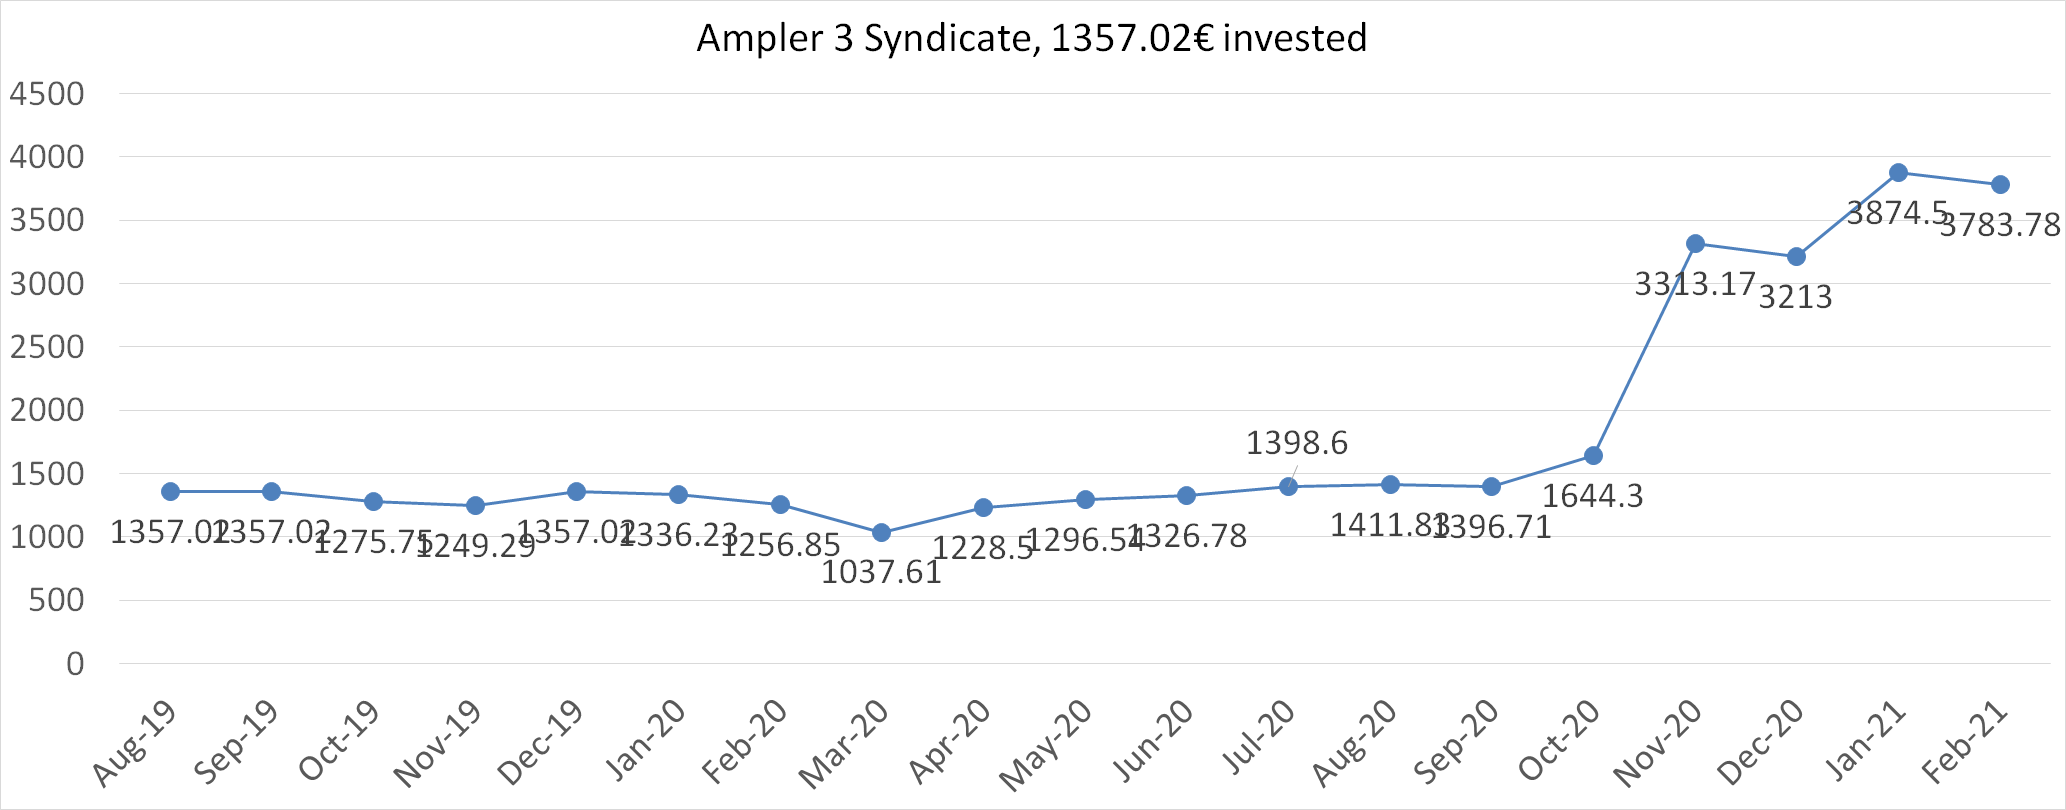 Ampler 3 syndicate worth february 2021